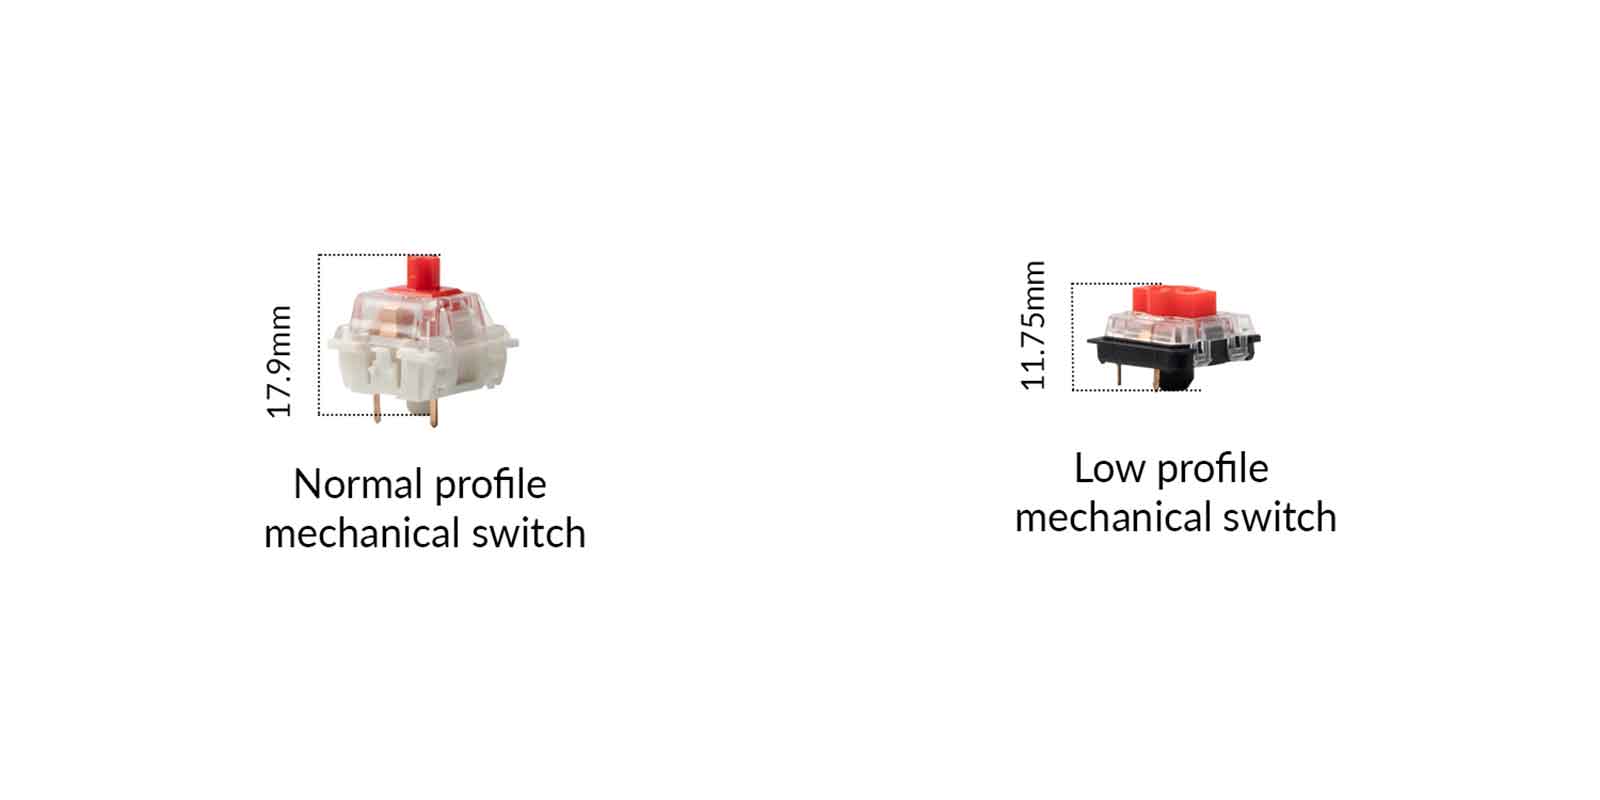 Normal-profile-mechanical-switch-vs-low-profile-mechanical-switch.jpg__PID:95f4b54c-389e-4367-b6f0-b294ea6dcb31